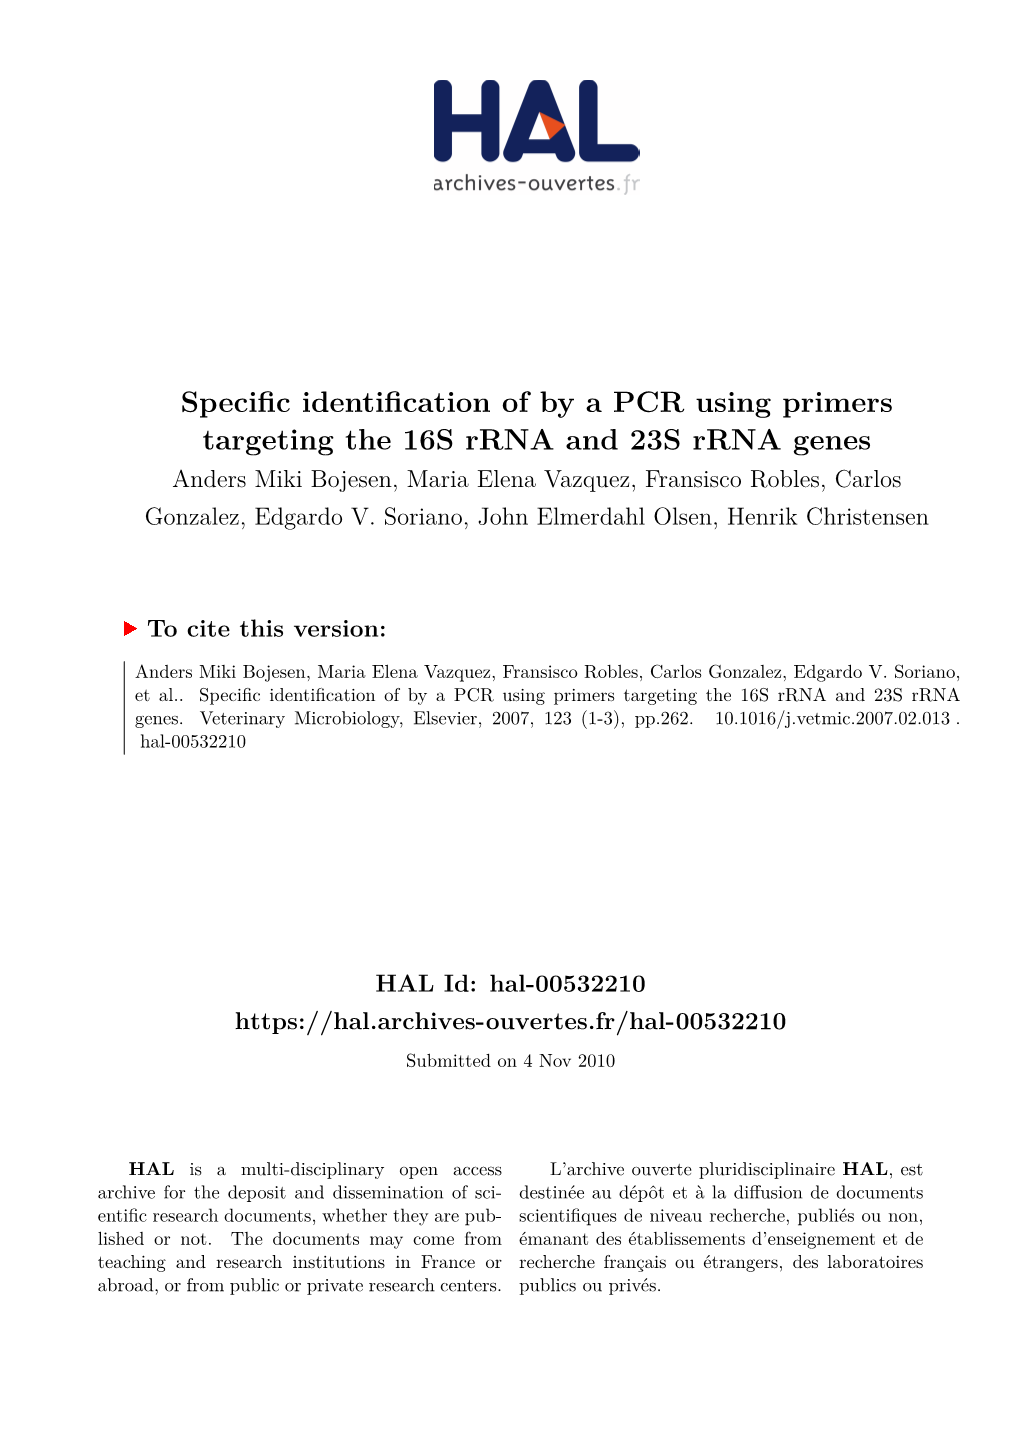 Specific Identification of by a PCR Using Primers Targeting the 16S